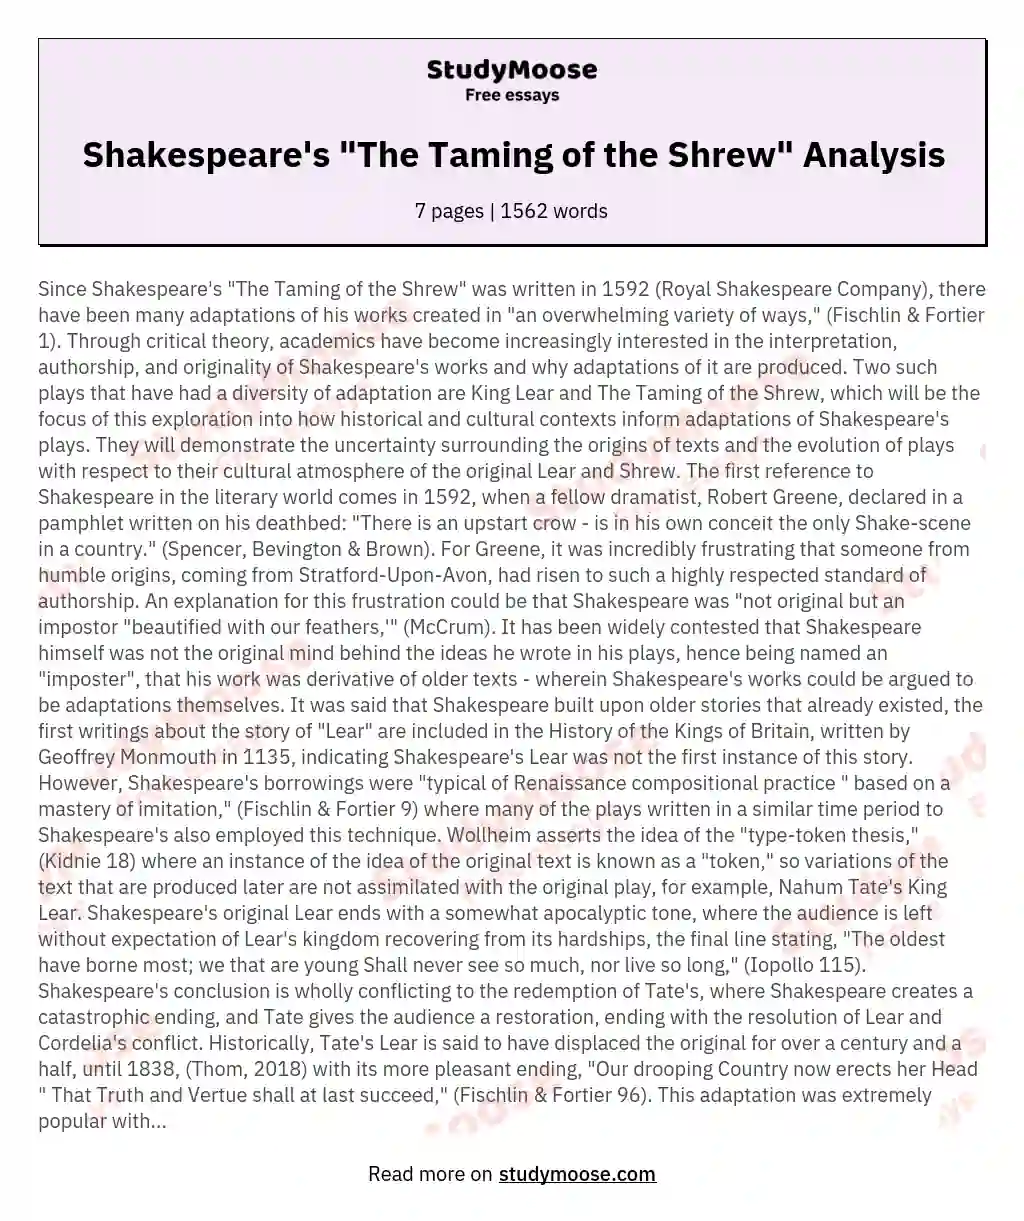 Shakespeare's "The Taming of the Shrew" Analysis essay